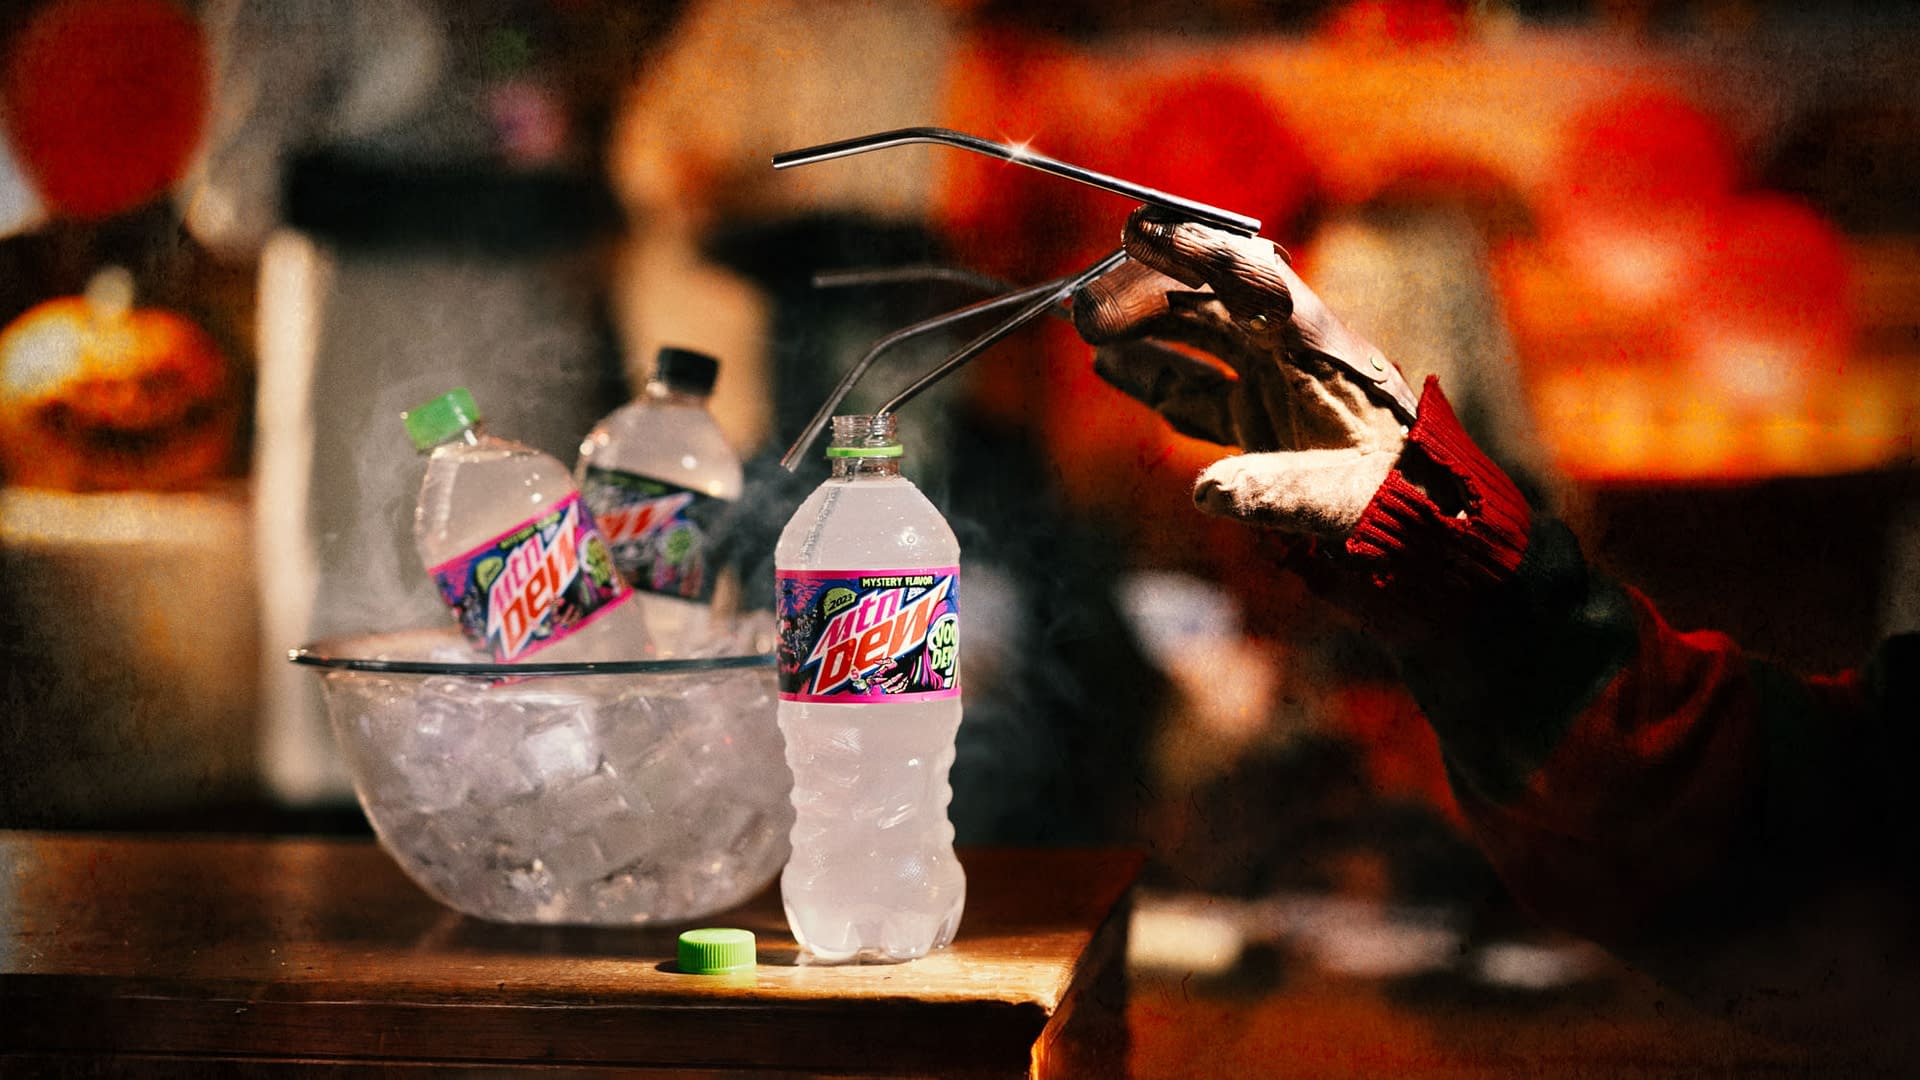 Get Spooky Once Again with the Return of MTN DEW VOO-DEW